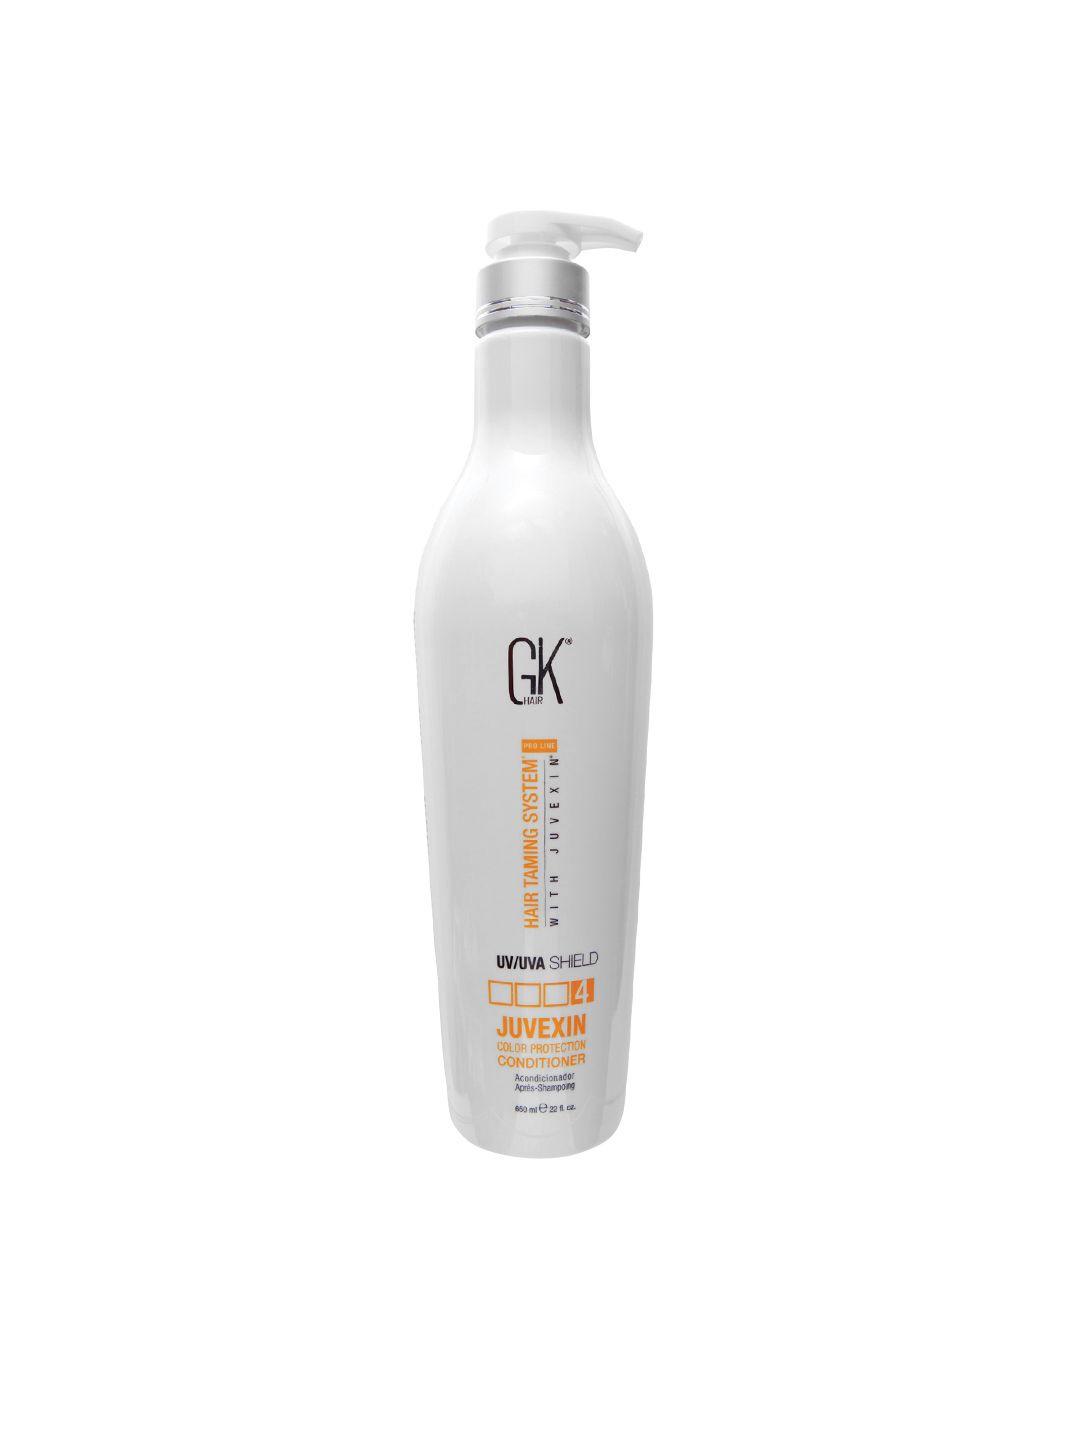 gk-hair-unisex-hair-taming-system-color-protection-conditioner-650-ml